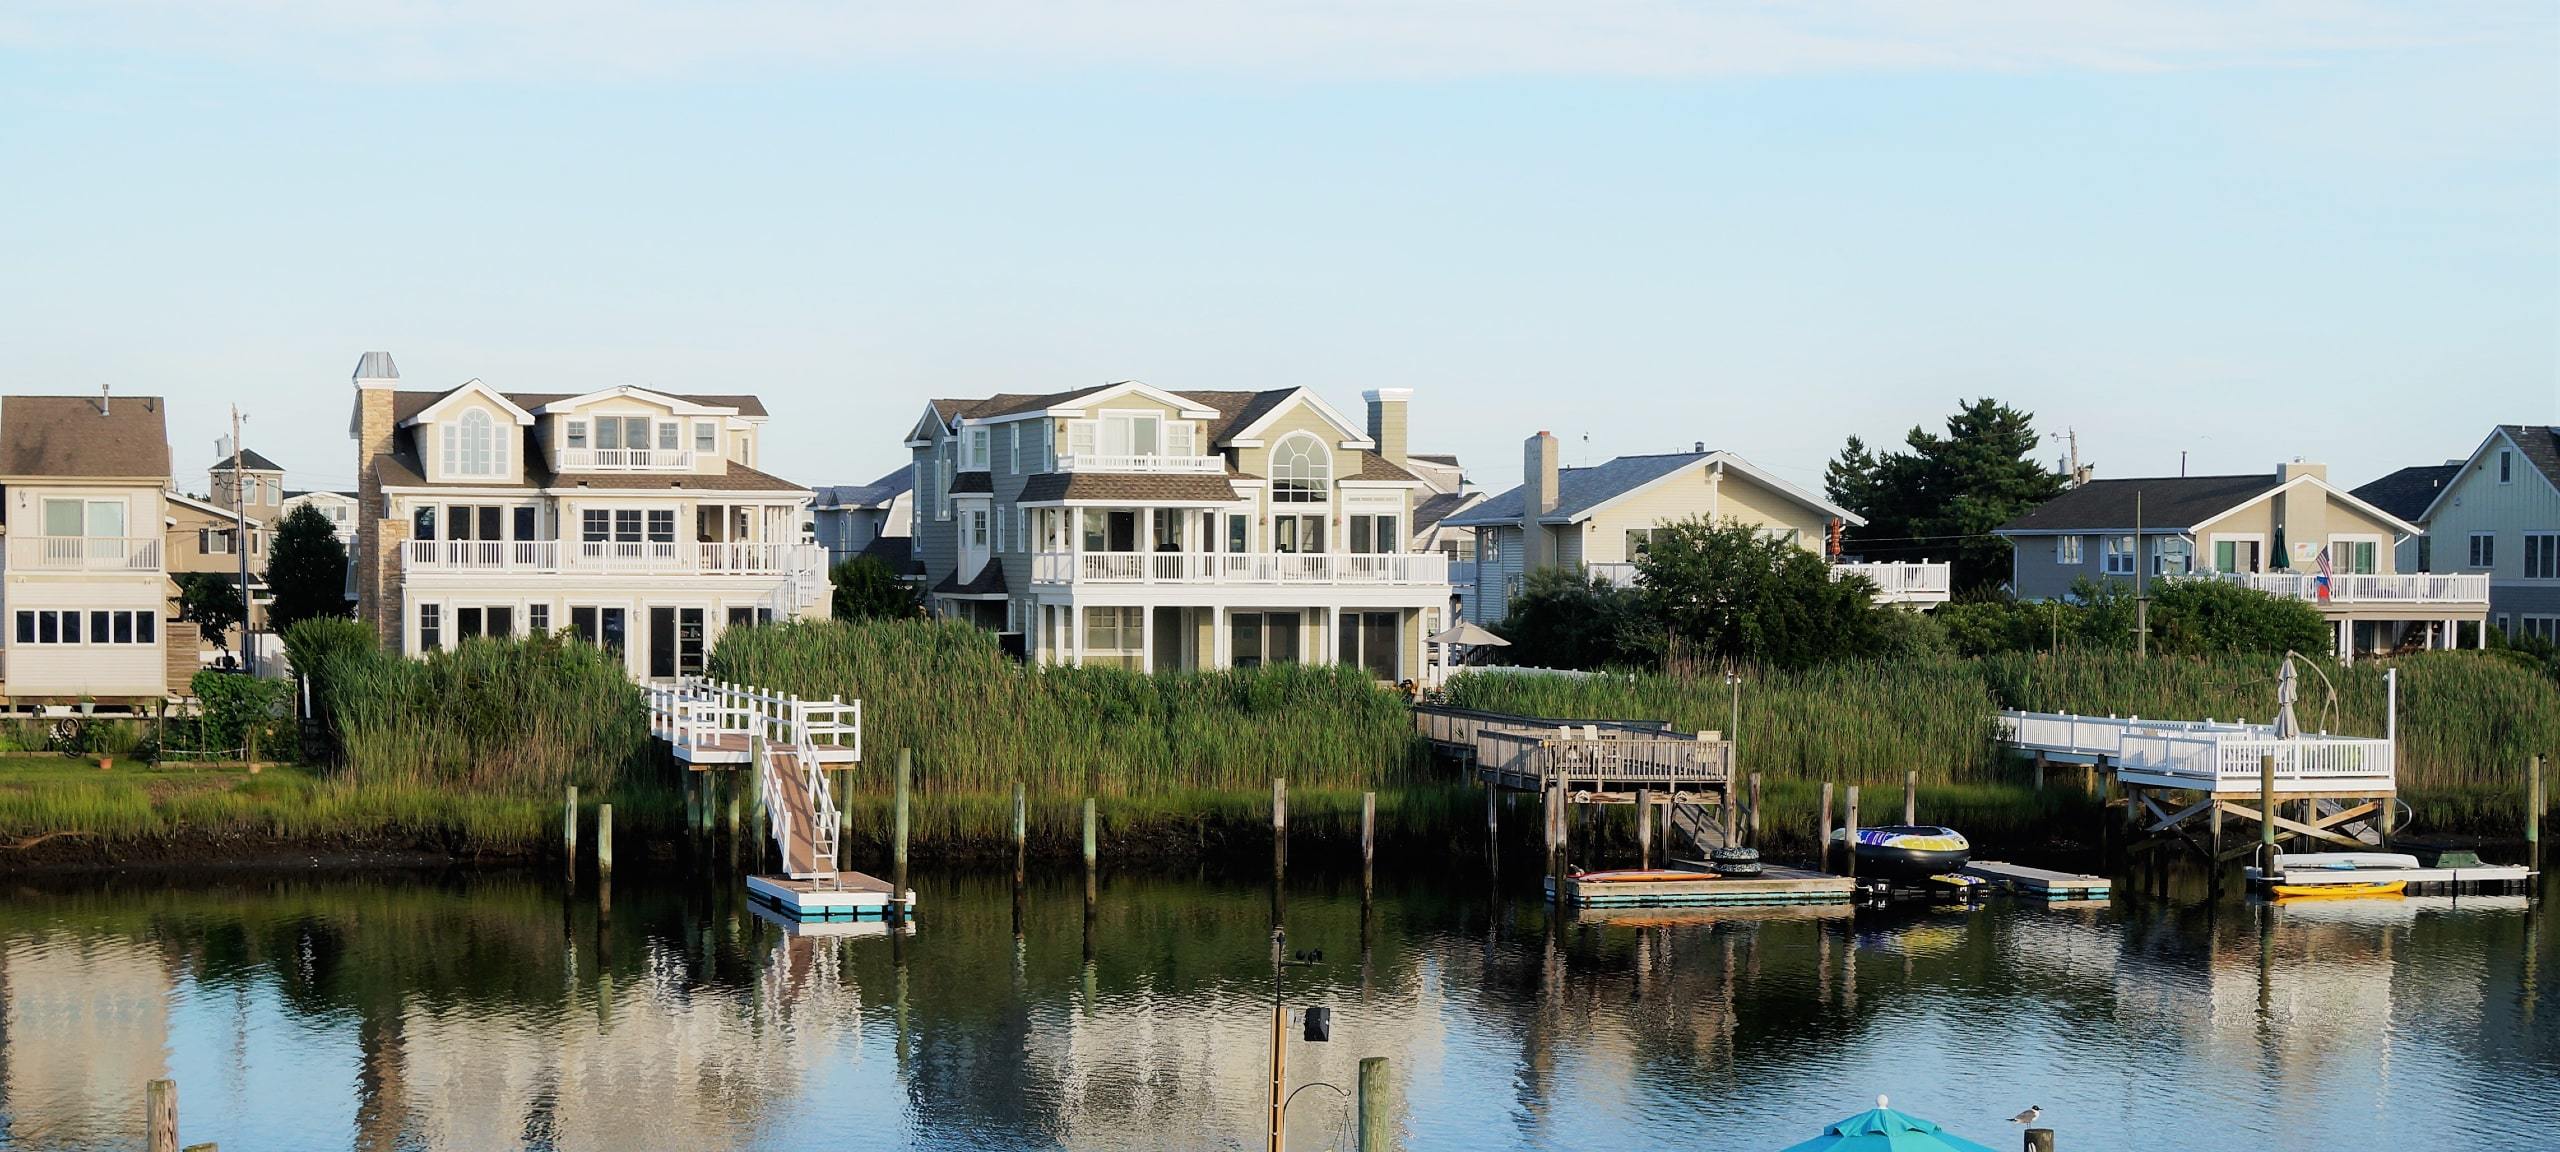 Luxury homes in the Jersey Shore area, located right on the waterfront